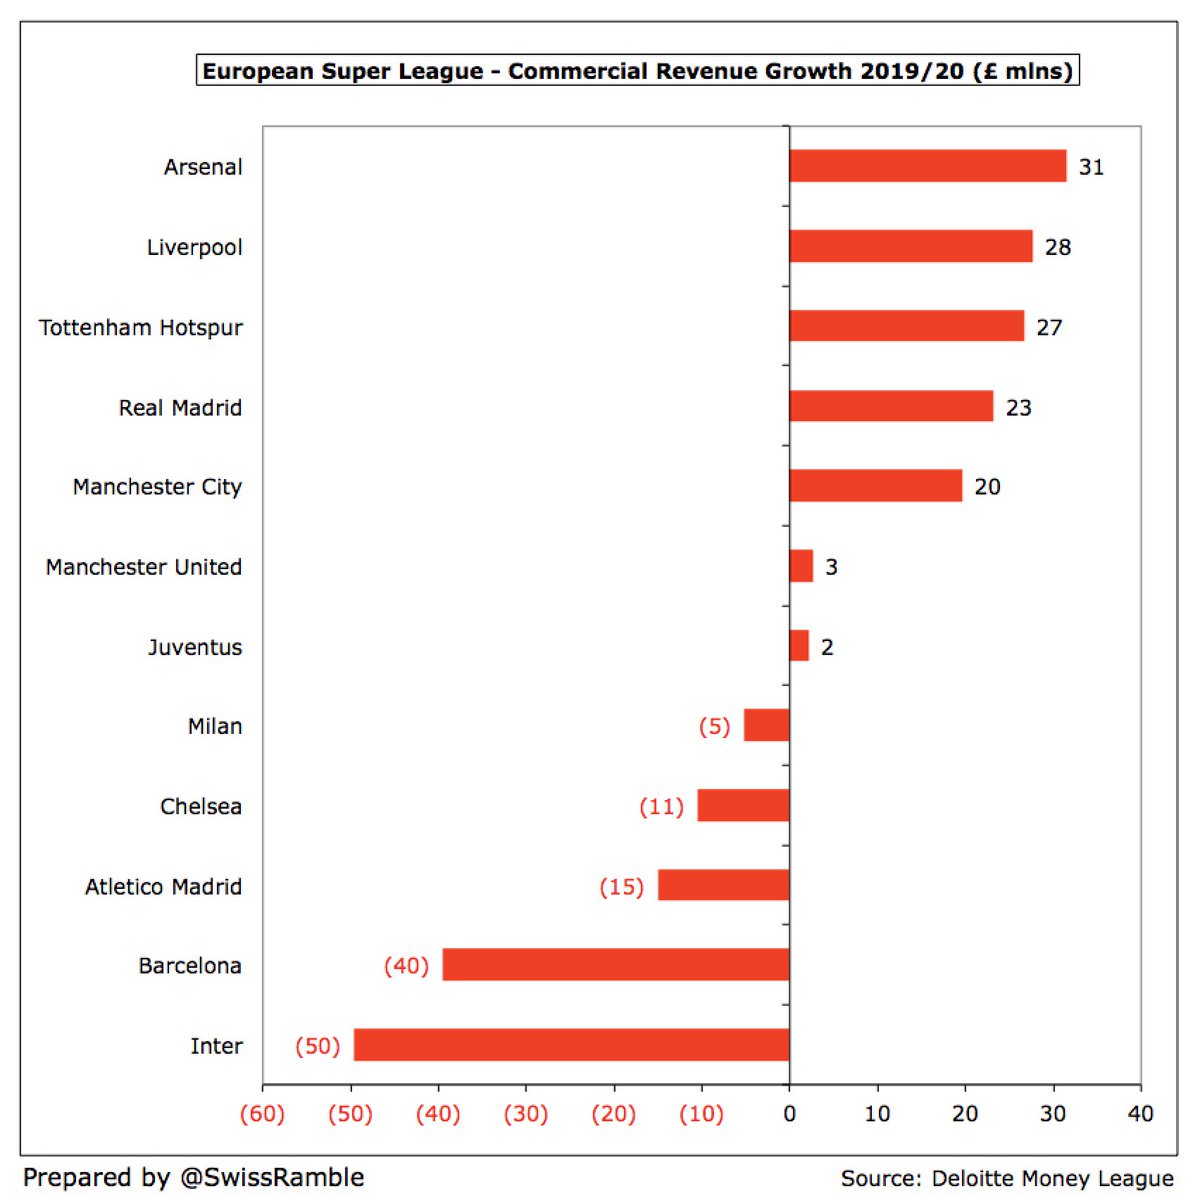 In fact, commercial income held up pretty well in the pandemic with many clubs actually increasing revenue in 2019/20, especially in England  #AFC £31m,  #LFC £28m and  #THFC £27m, mainly due to new sponsorship deals, though new stadium also helped Spurs.